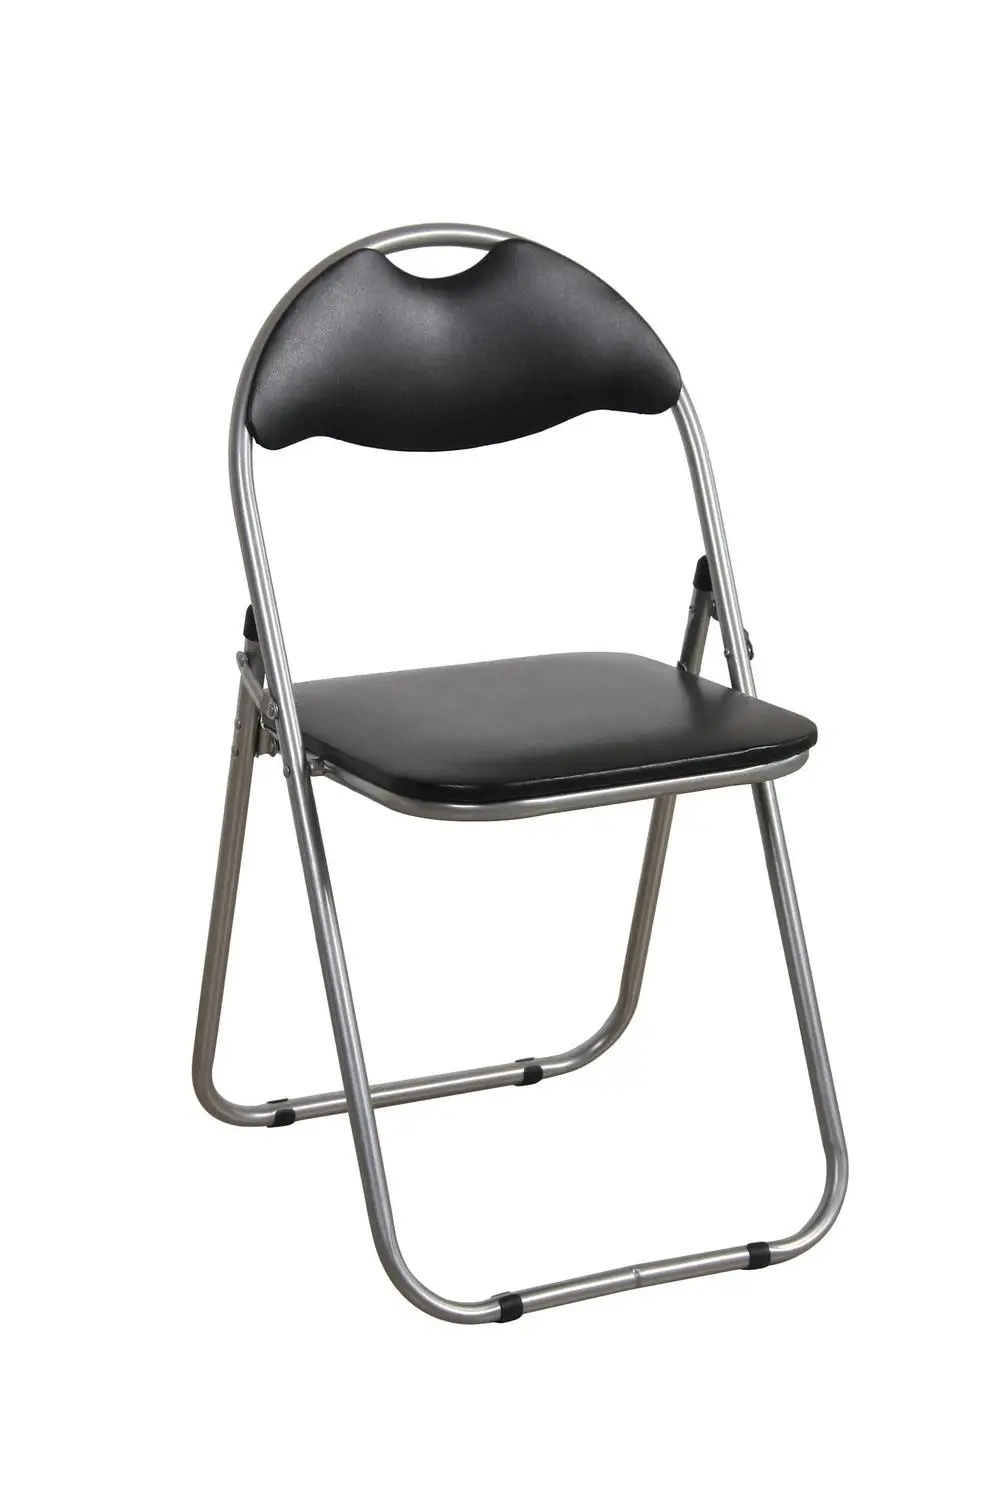 Cheap Metal Folding Chair Seat Cushions On Wholesale Buy